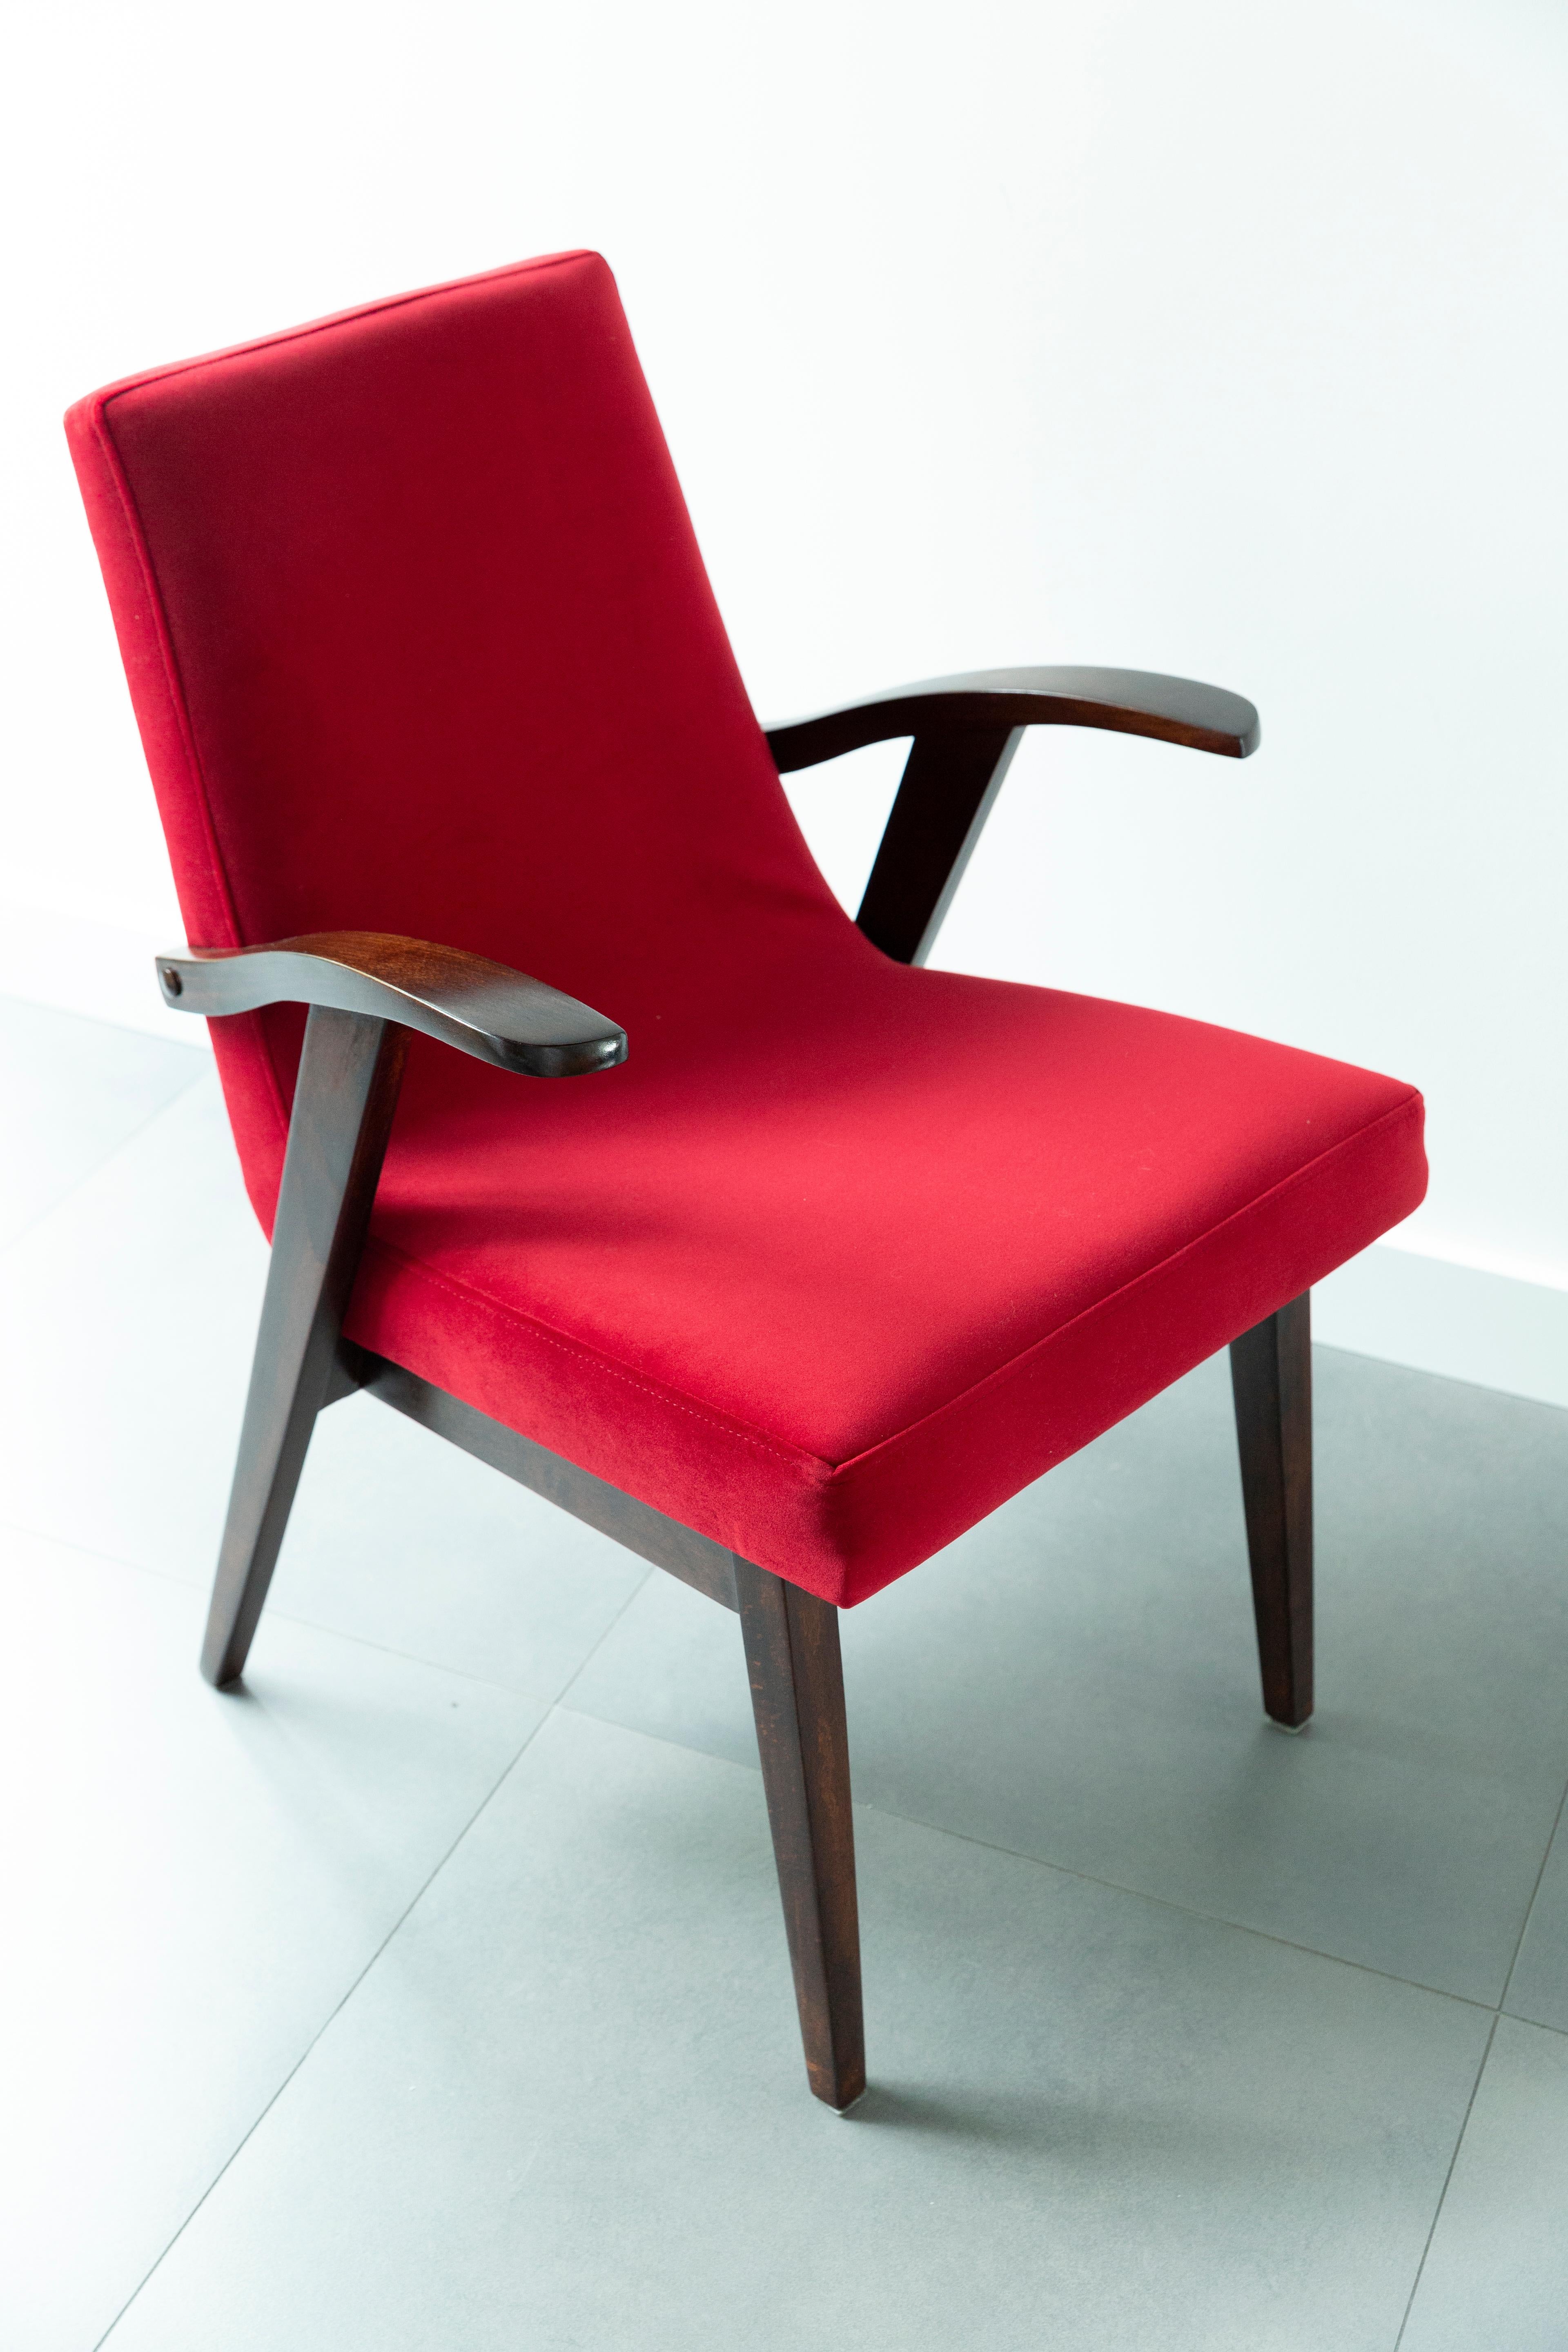 Hand-Crafted 20th Century Vintage Red Armchair by Mieczyslaw Puchala, 1960s For Sale